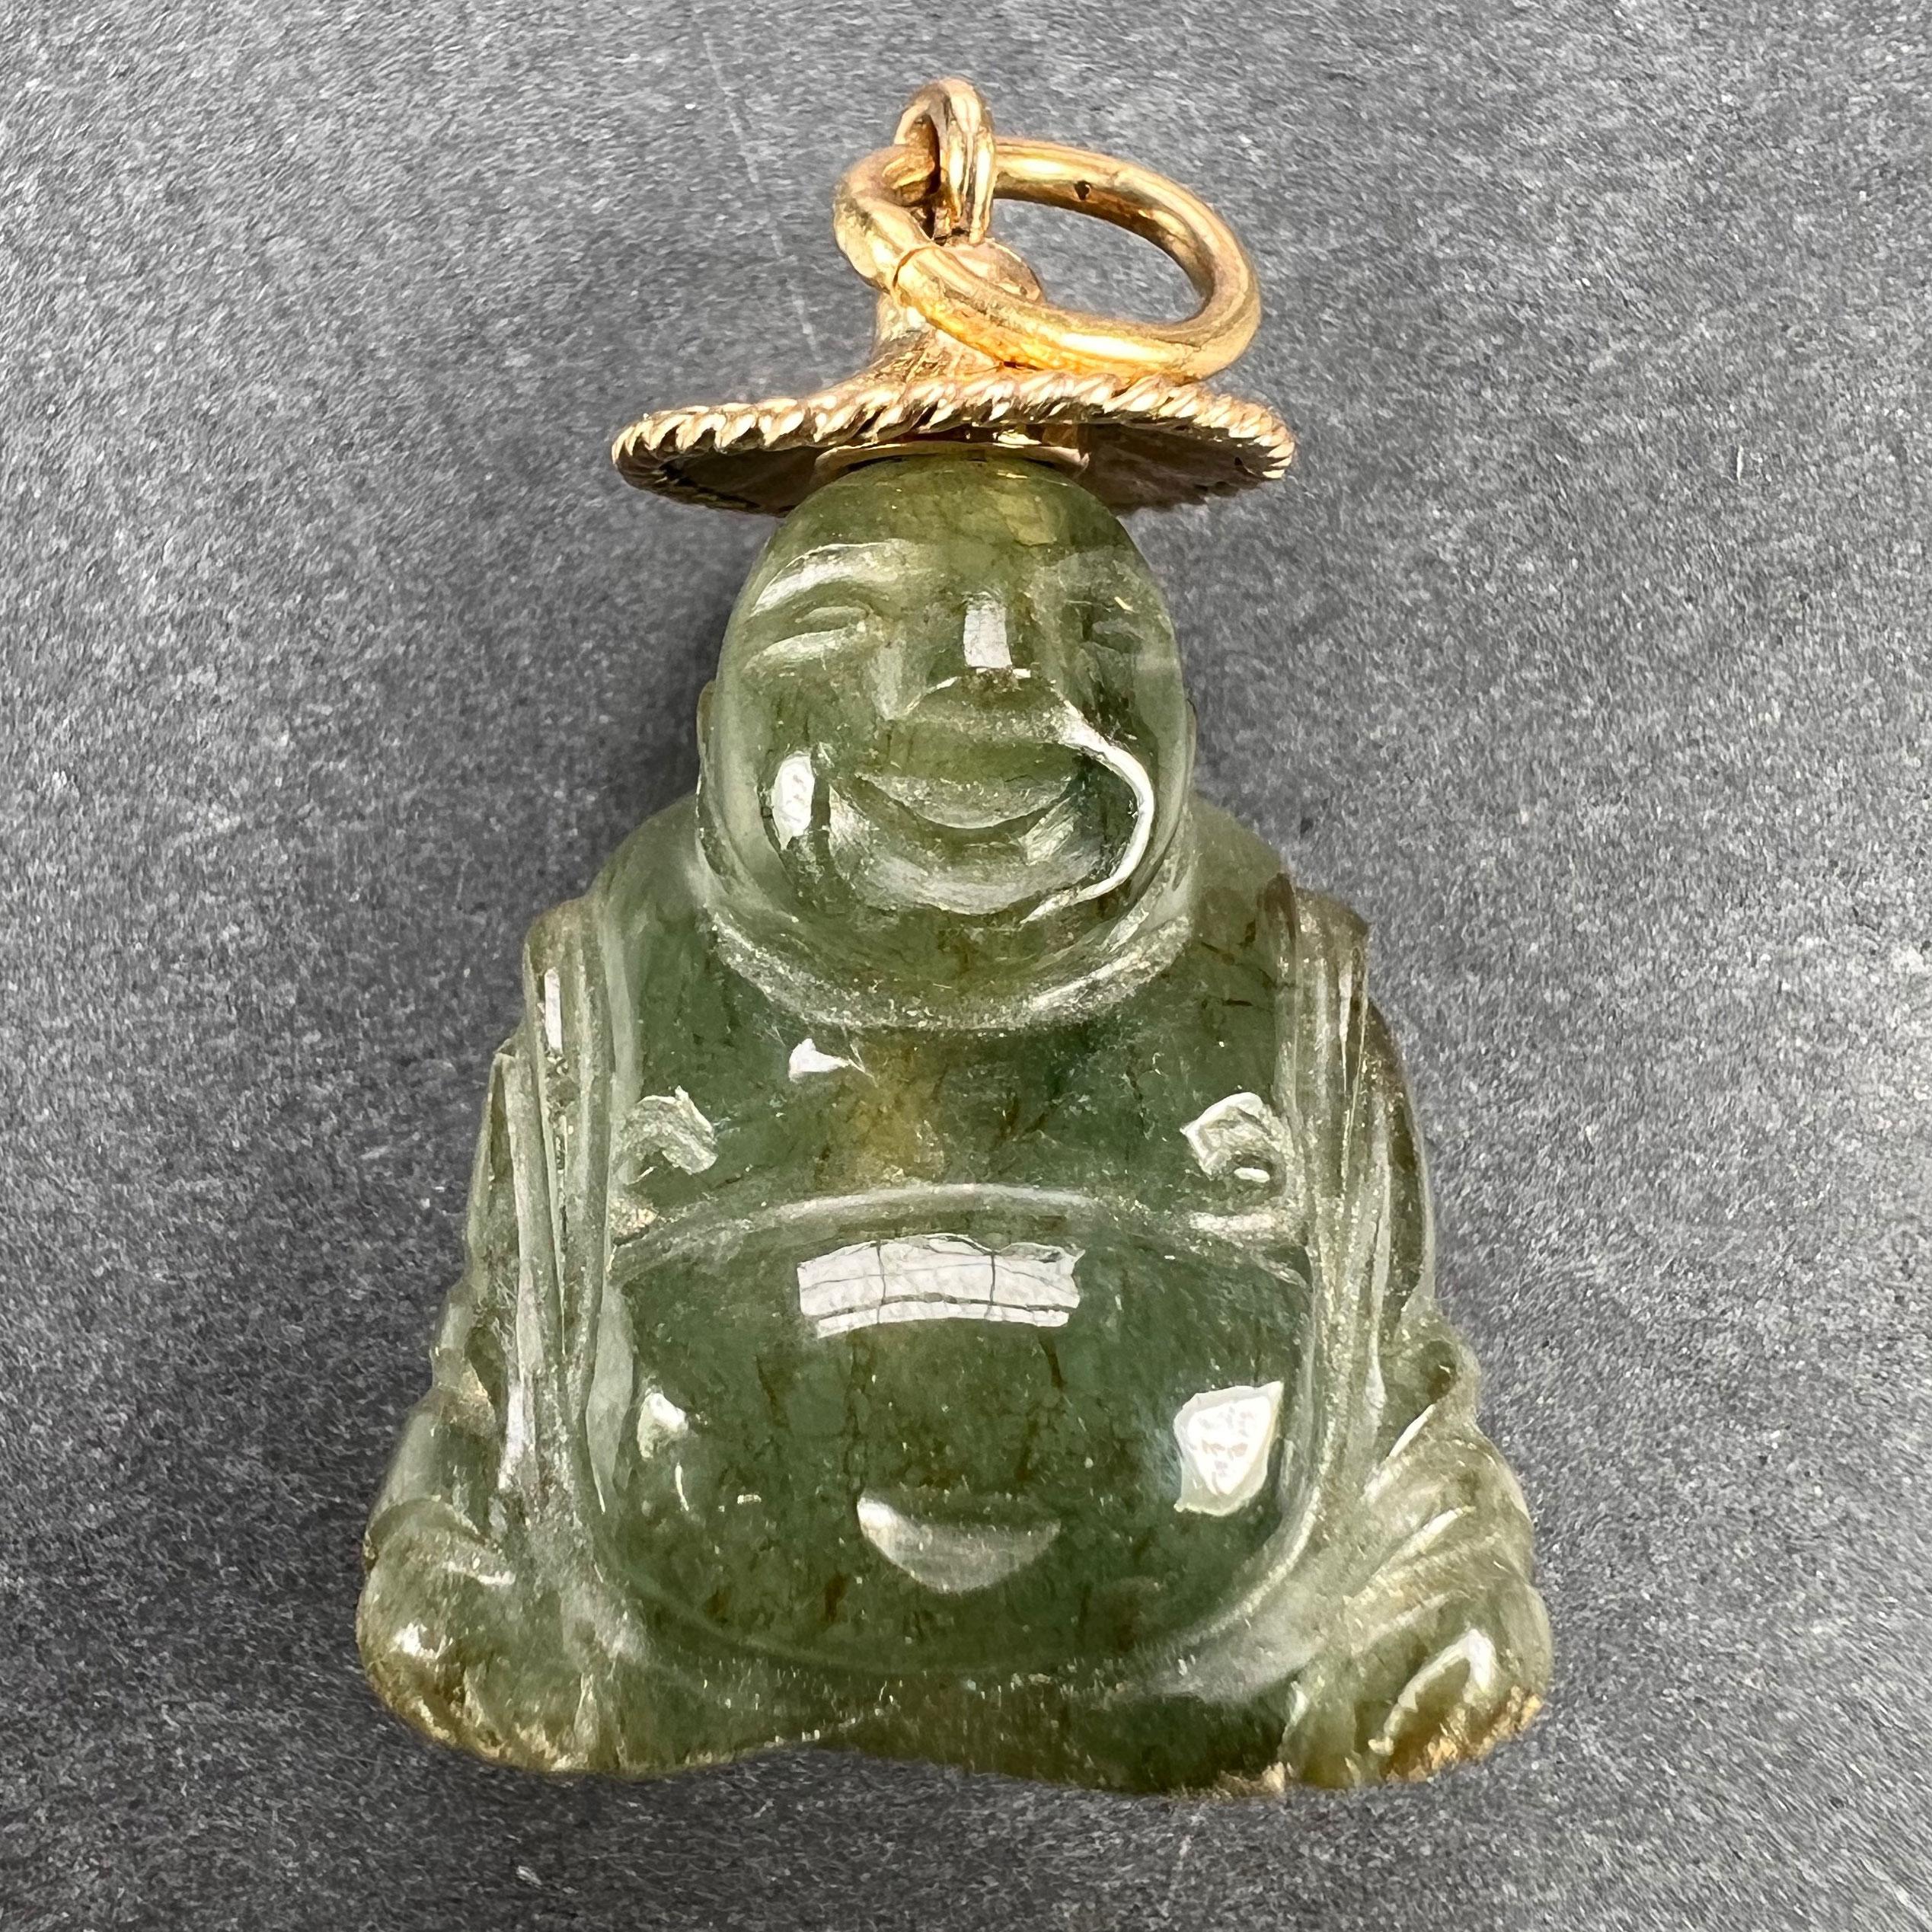 A charm pendant designed as a large carved Buddha sculpture in green jadeite jade with 18 karat (18K) yellow gold terminals. The jadeite is natural, has not been dyed and shows some evidence of natural iron staining. Unmarked but tested for 18 karat